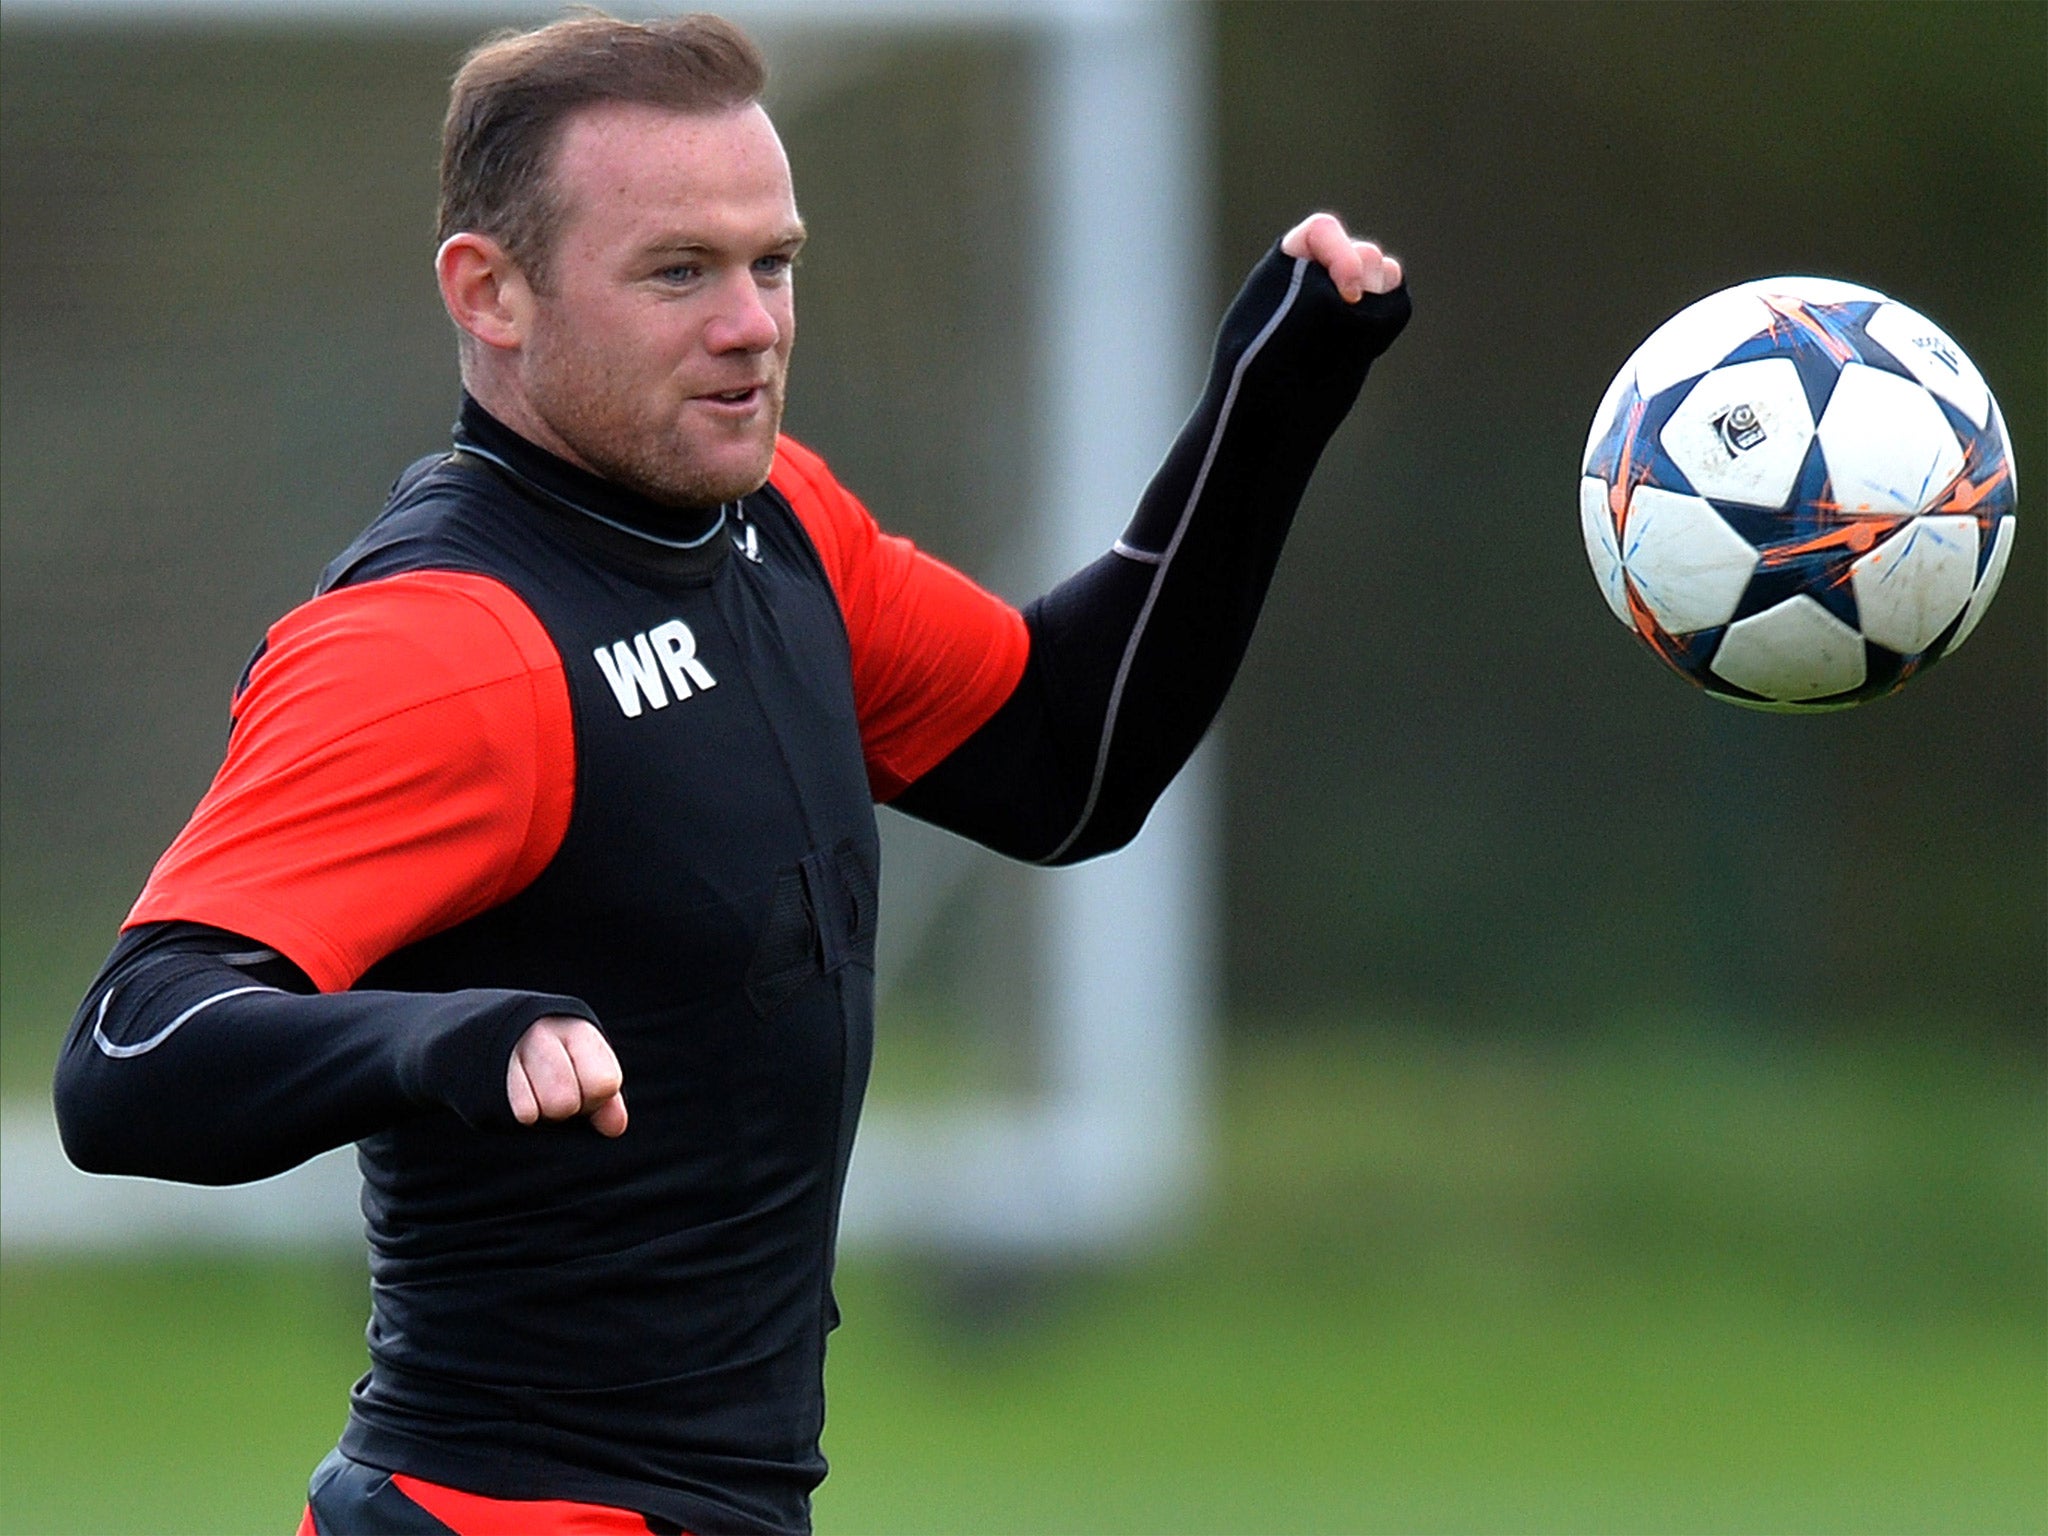 Jo-anne's son is named after England and Manchester United striker Wayne Rooney